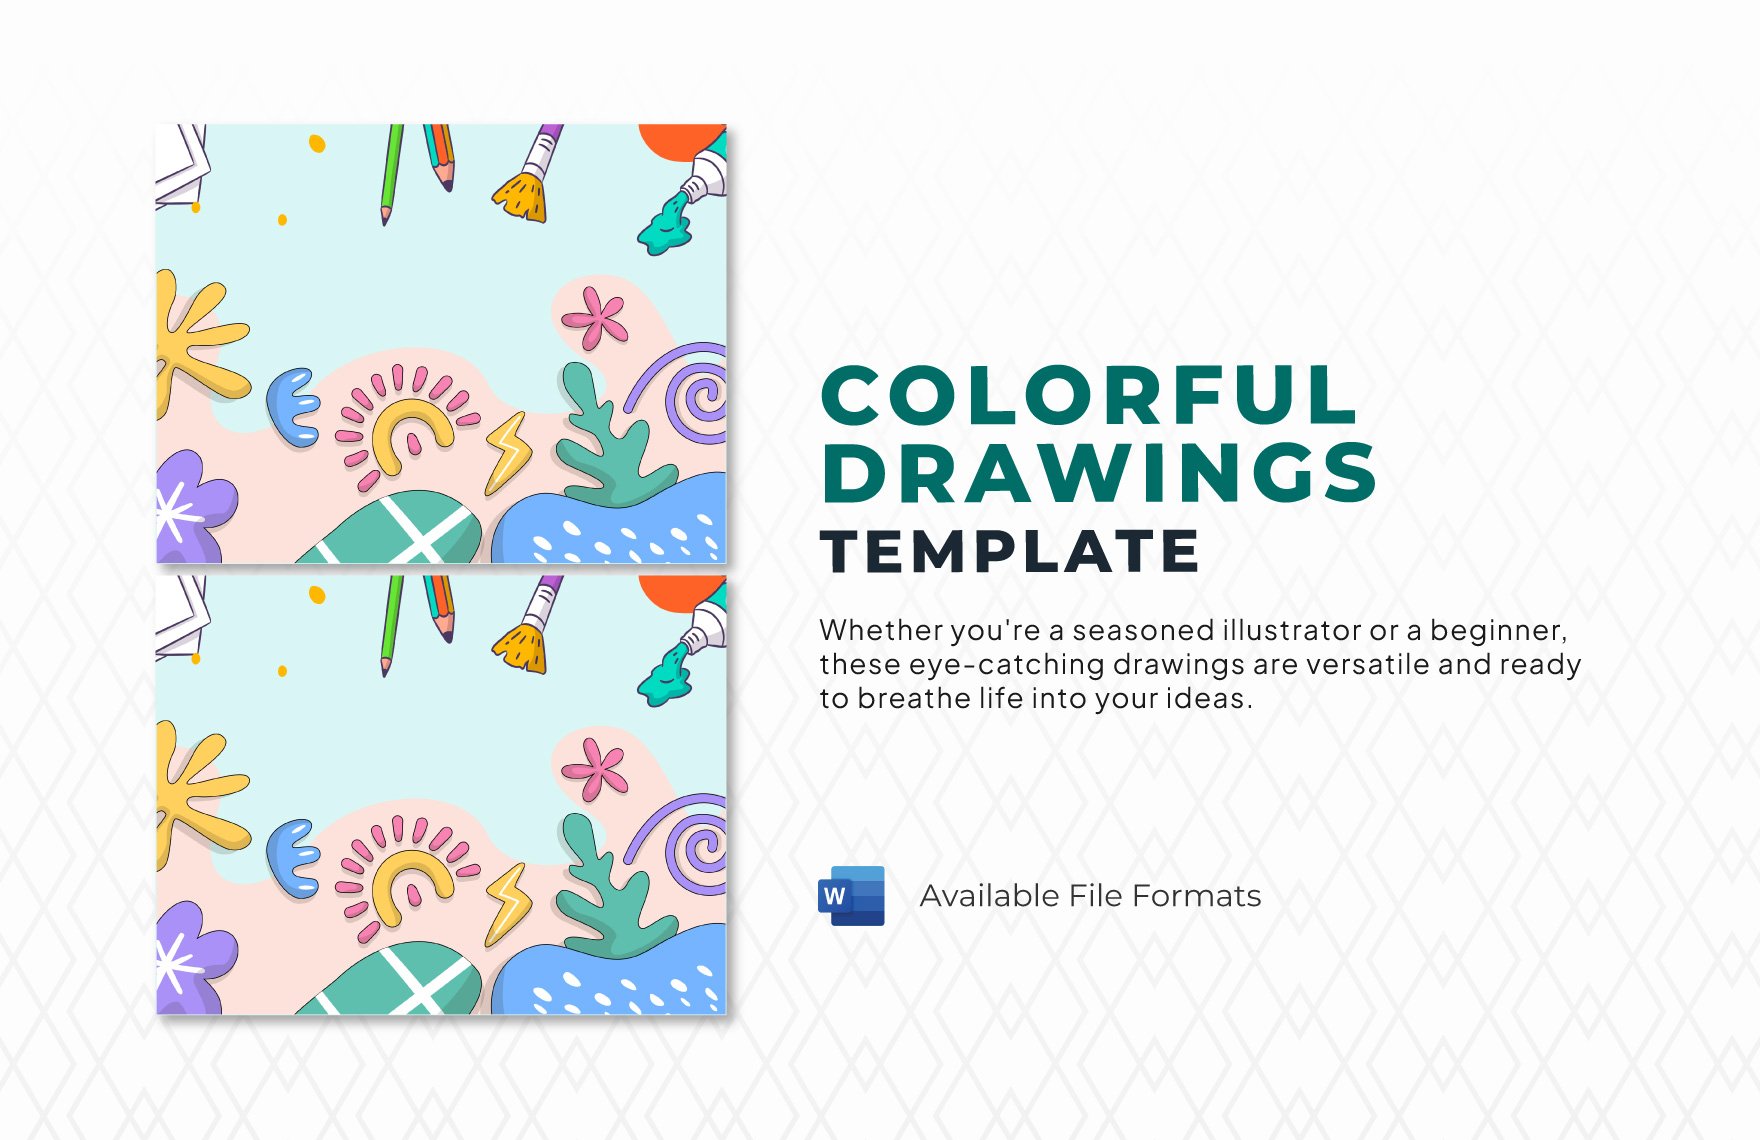 Colorful Drawings Template